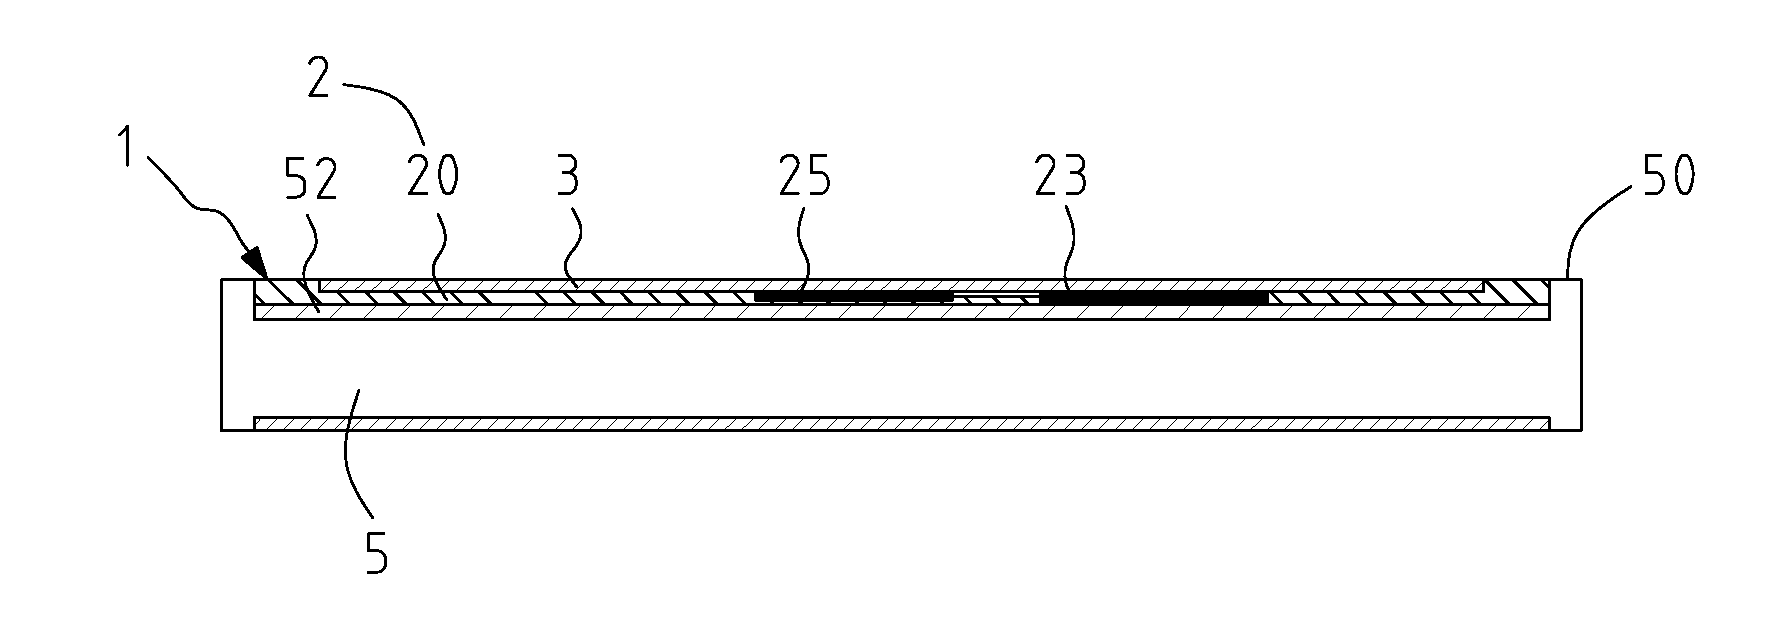 Flash illumination device for use with electronic apparatus or mobile device